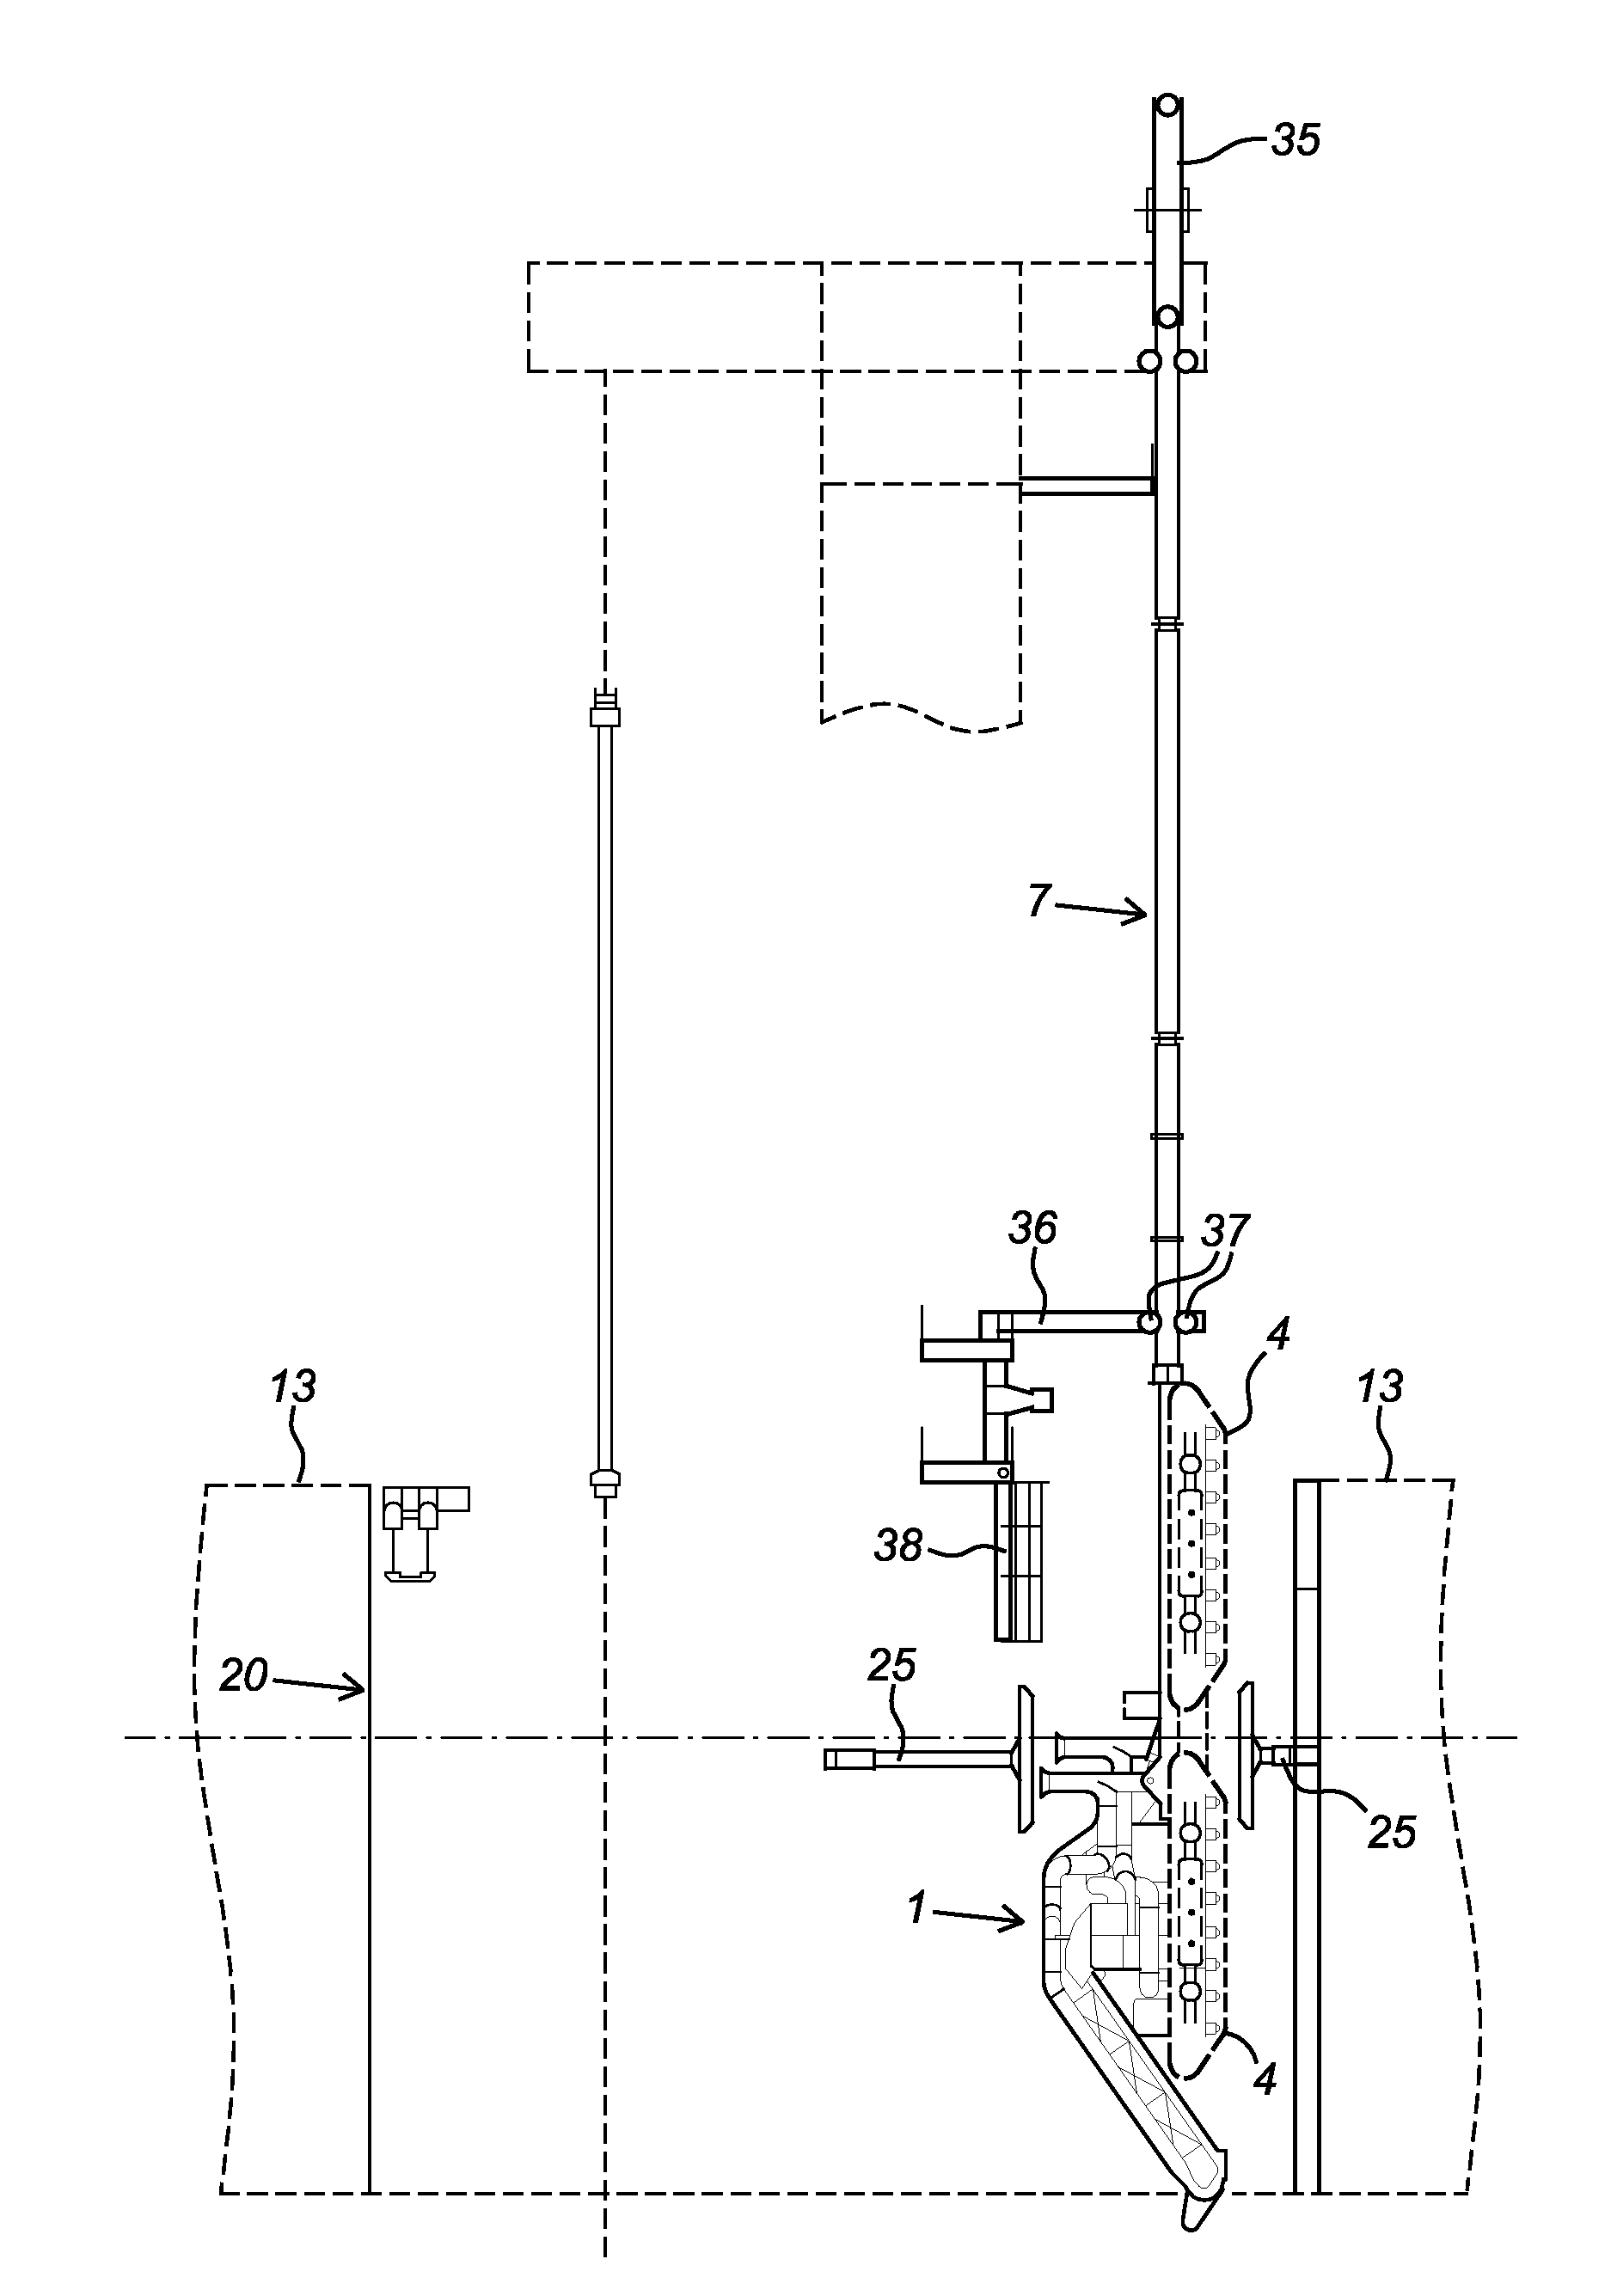 Device for Launching a Subsurface Mining Vehicle Into a Water Mass and Recovering the Same from the Water Mass